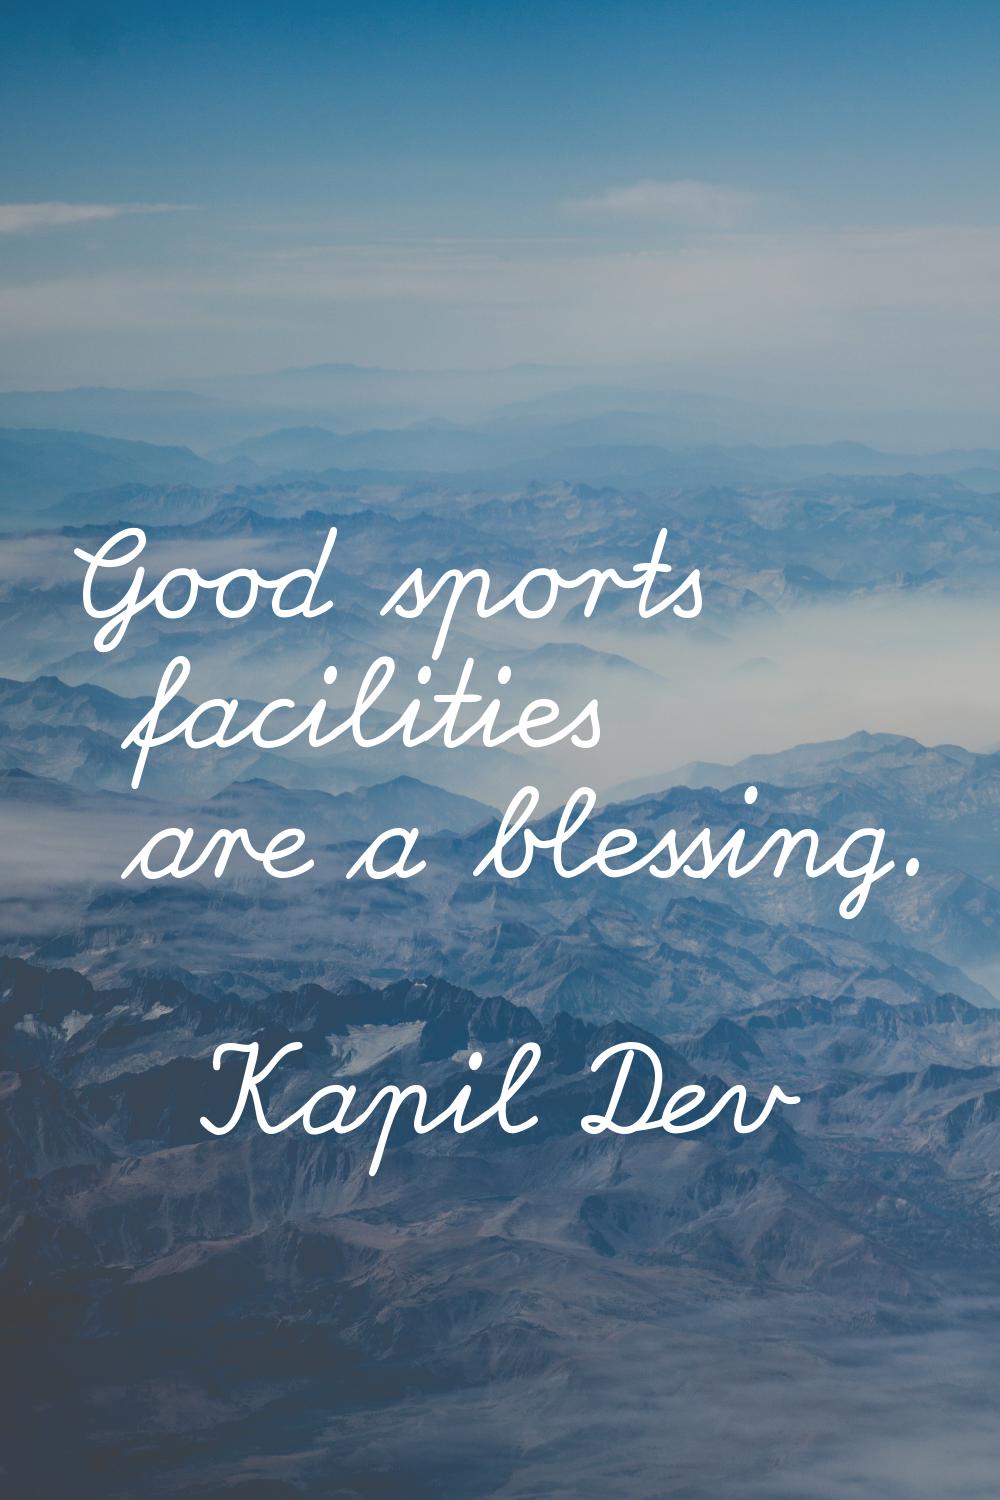 Good sports facilities are a blessing.